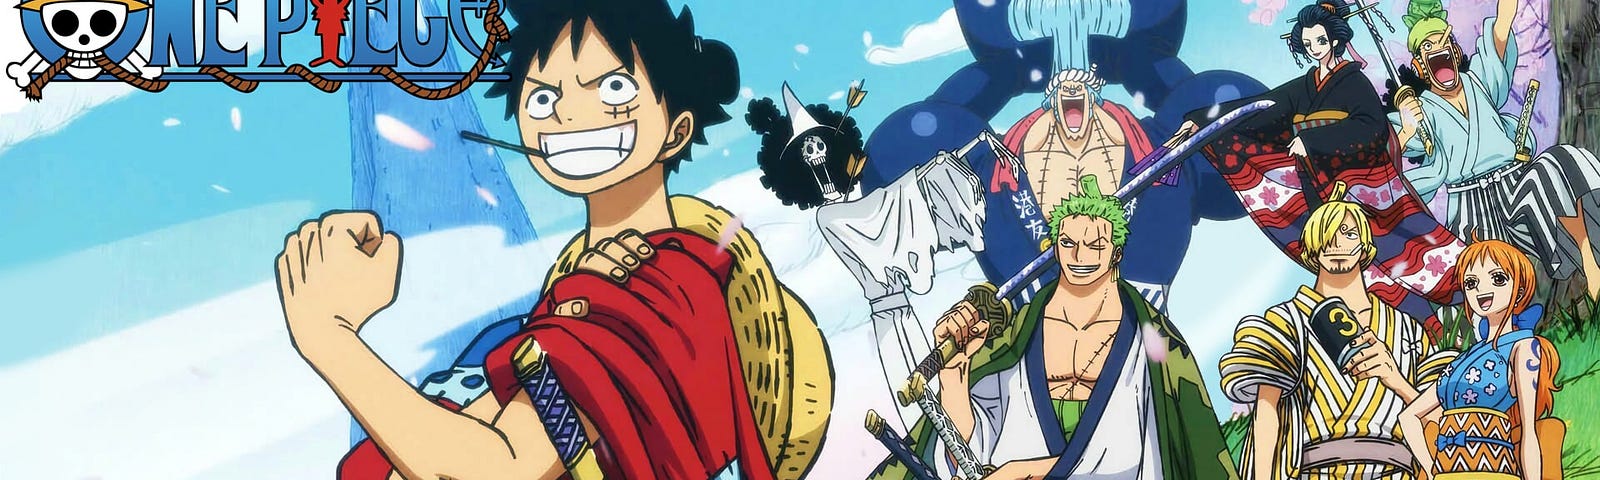 Trending Stories Published On One Piece S21e61 Full Epssdf Medium